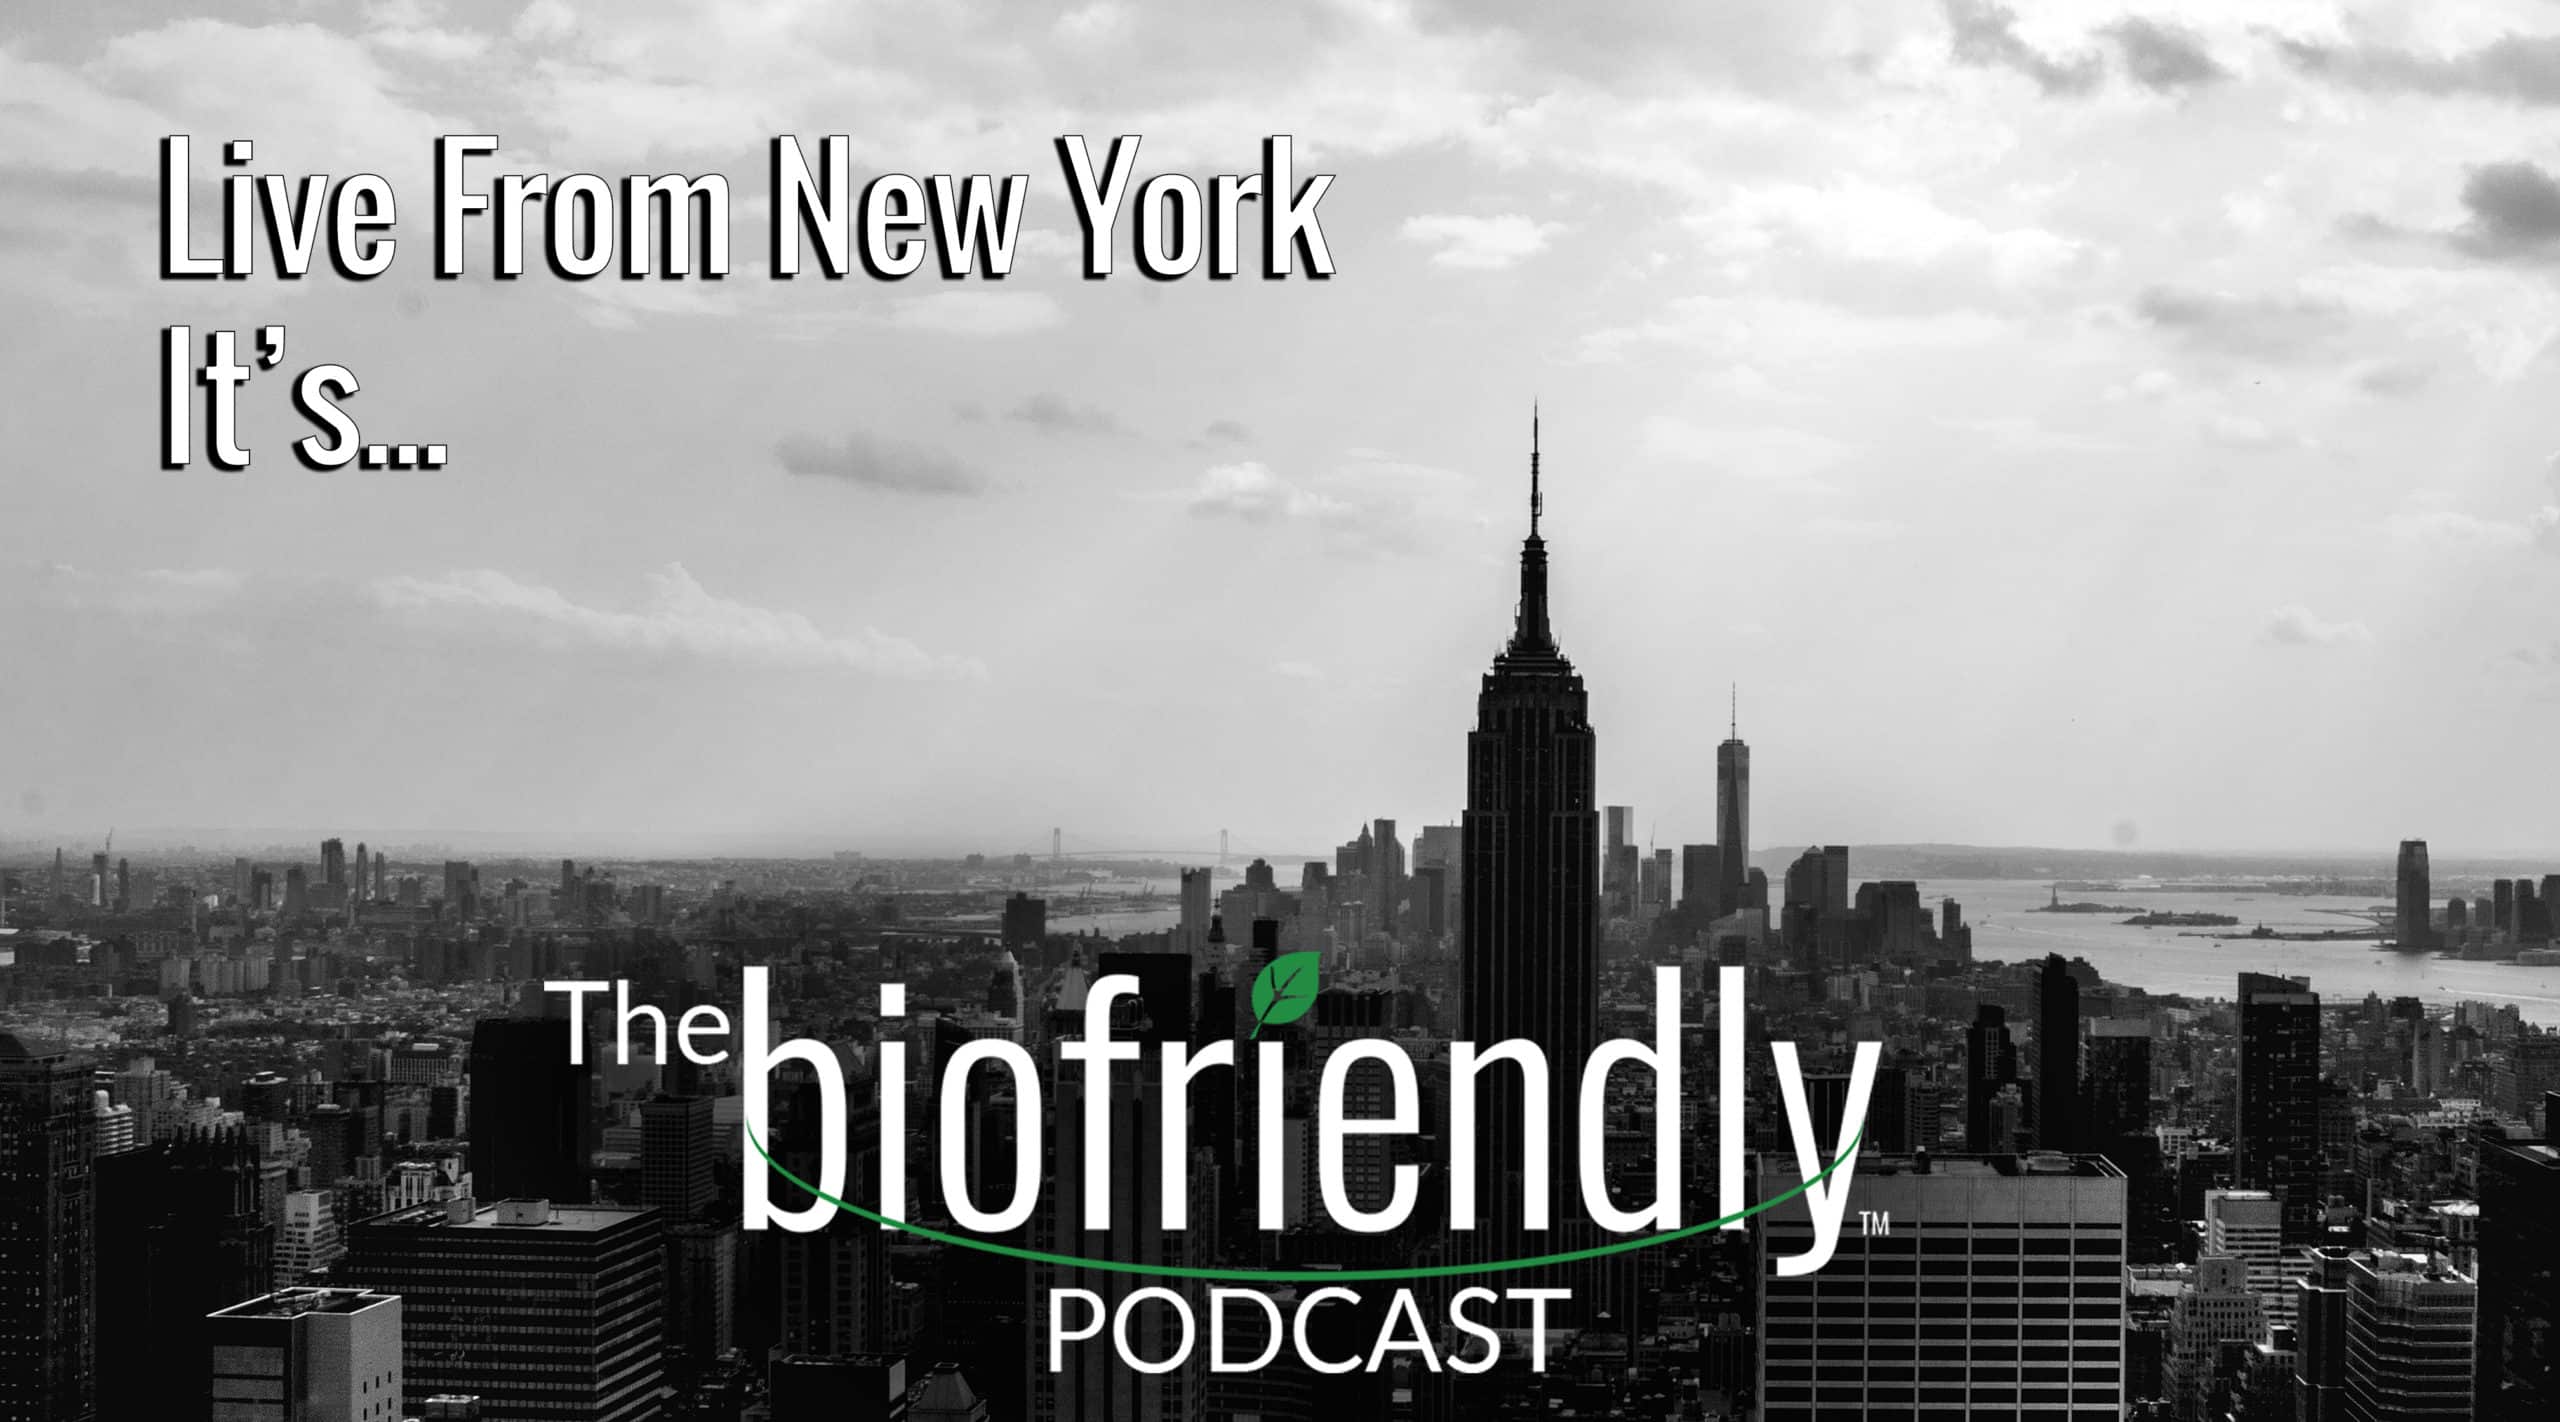 The Biofriendly Podcast - Episode 23 - Live From New York It's The Biofriendly Podcast